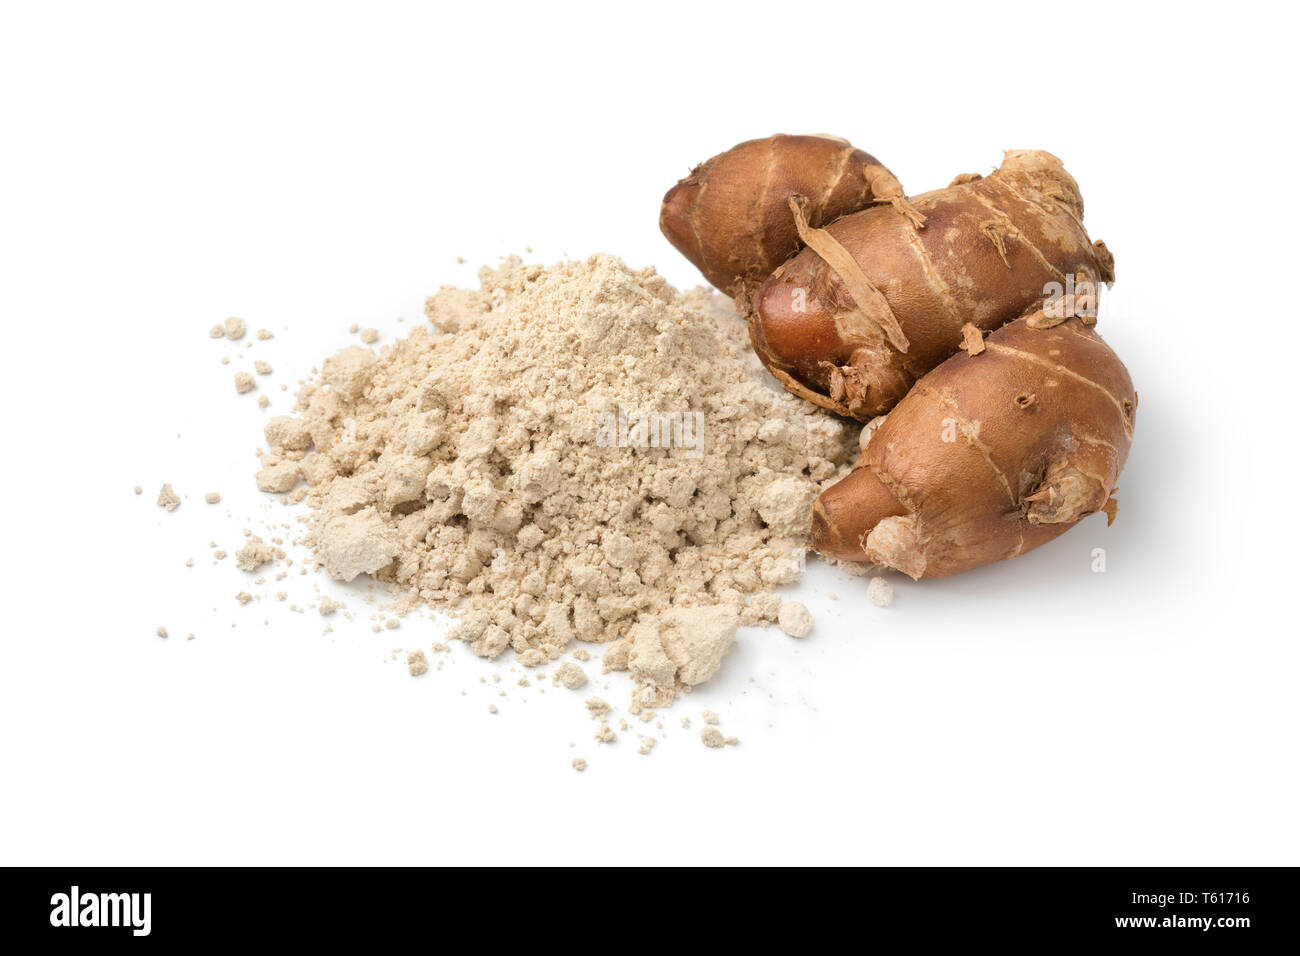 Fresh raw kencur rhizome and heap of dried powder isolated on white background Stock Photo